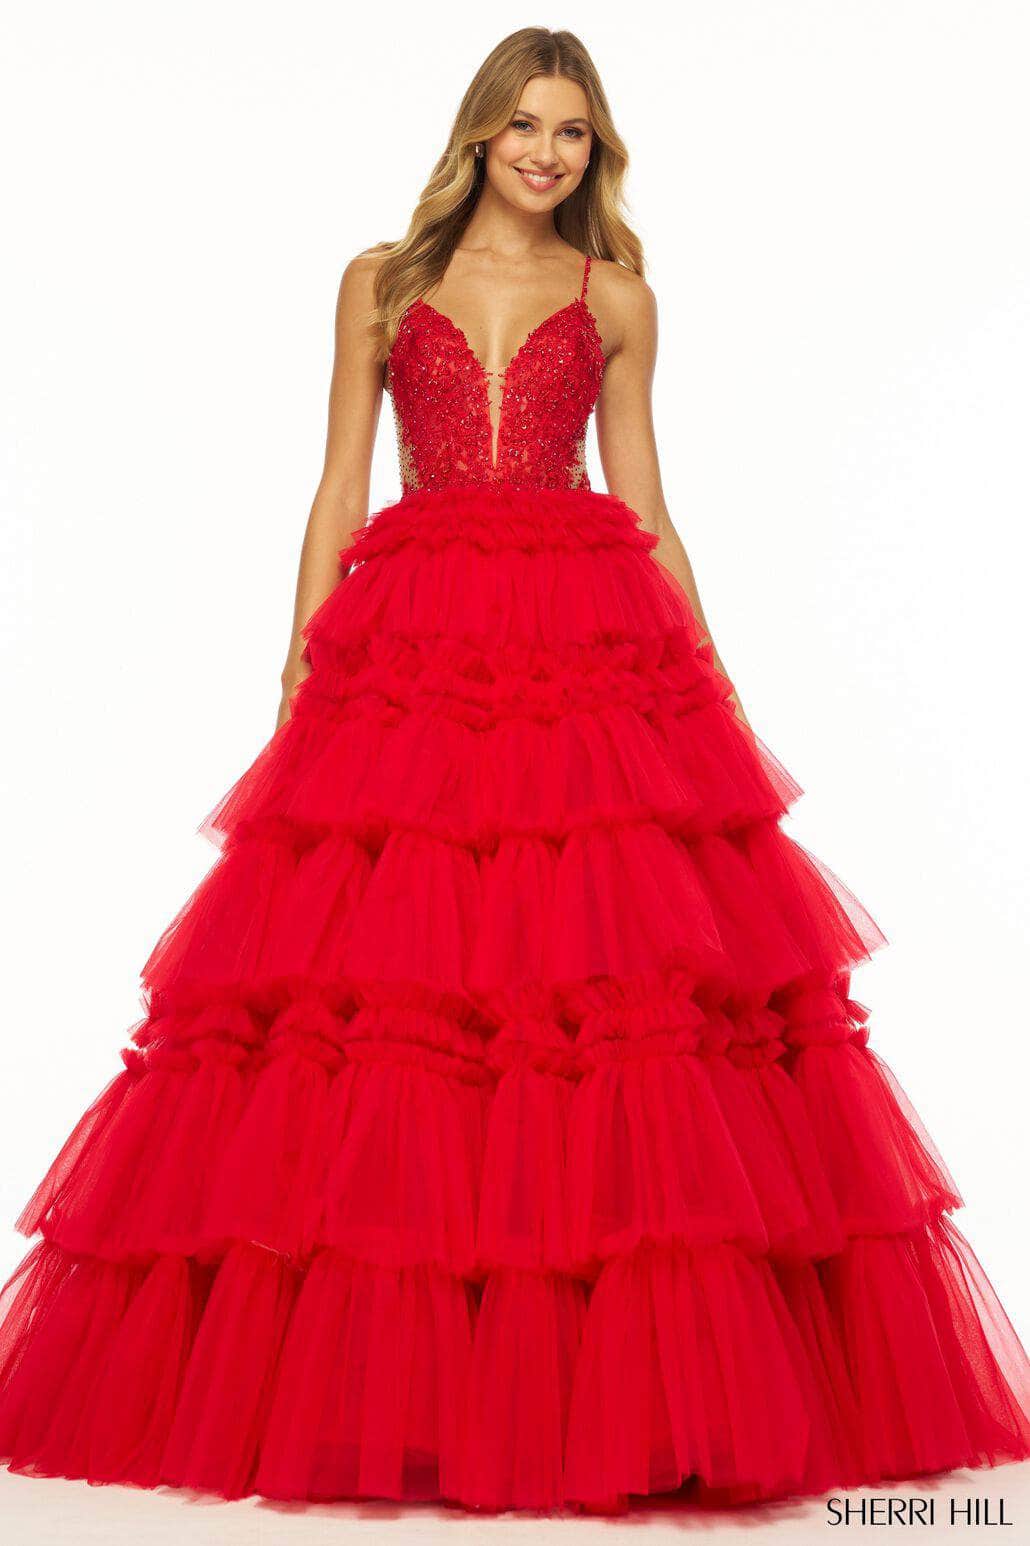 Sherri Hill 56102 - Plunging Ruffle Gown Special Occasion Dress